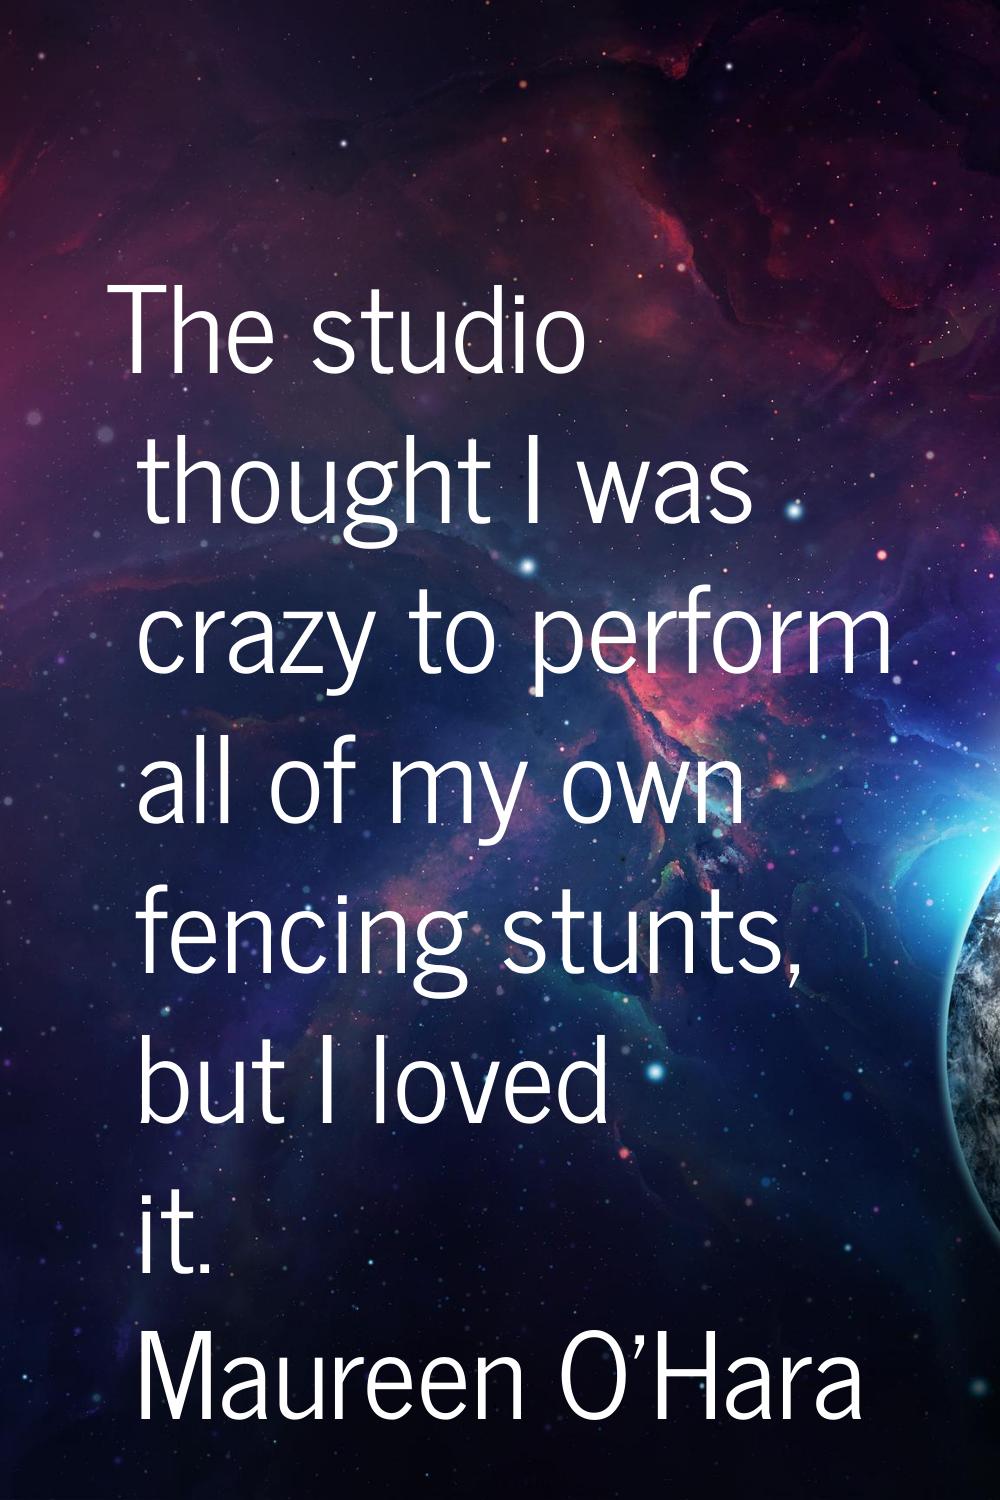 The studio thought I was crazy to perform all of my own fencing stunts, but I loved it.